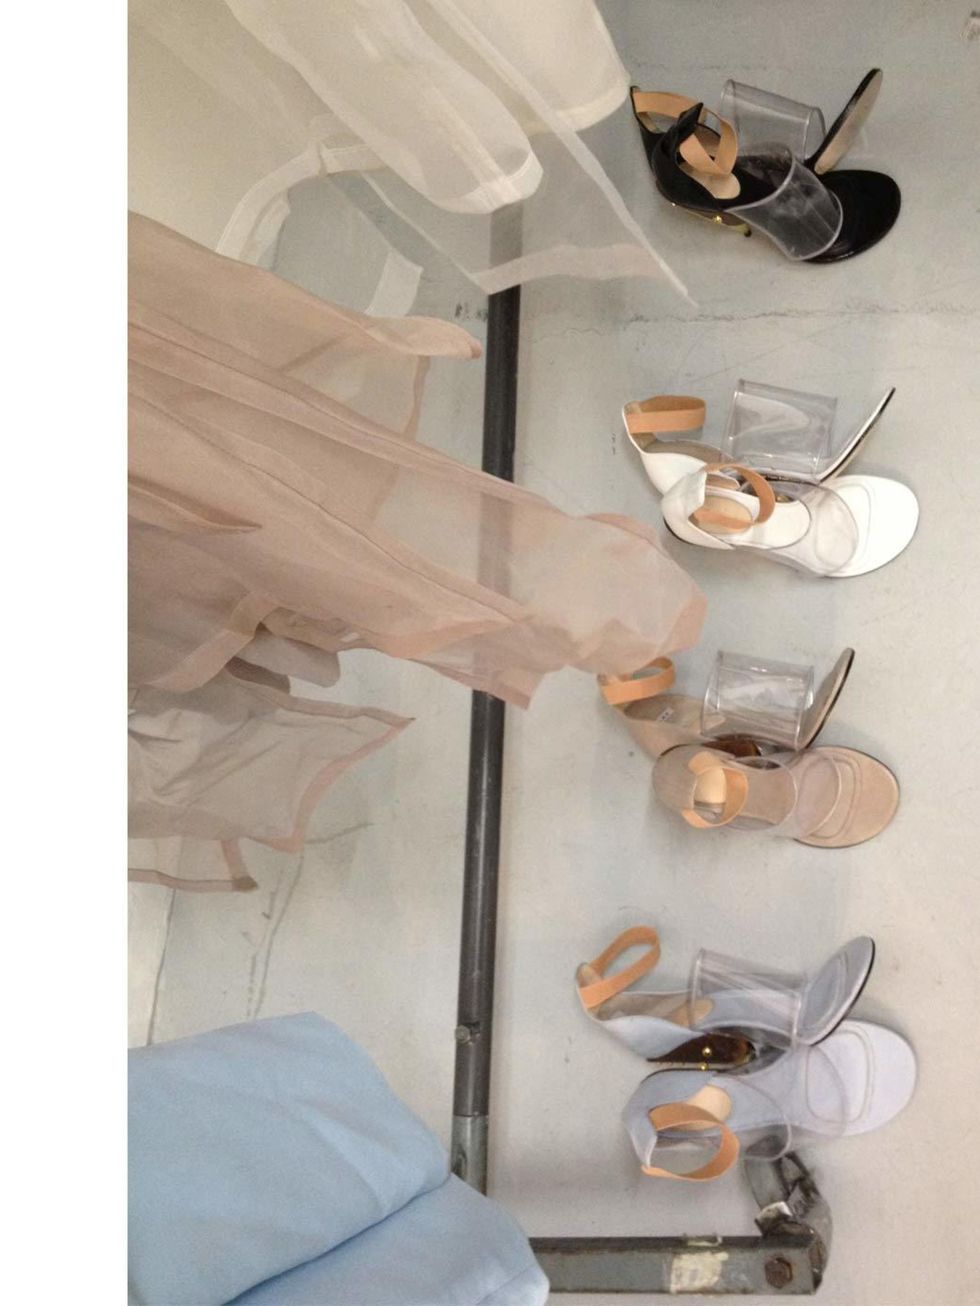 <p>The Rail...</p><p>Simple <a href="http://www.elleuk.com/elle-tv/catwalk/givenchy-spring-summer-13">Givenchy S/S</a> perfection. Floaty, ruffled, romantic and offset by those PVC leather heels that we all had to try out for safety first, of course</p>